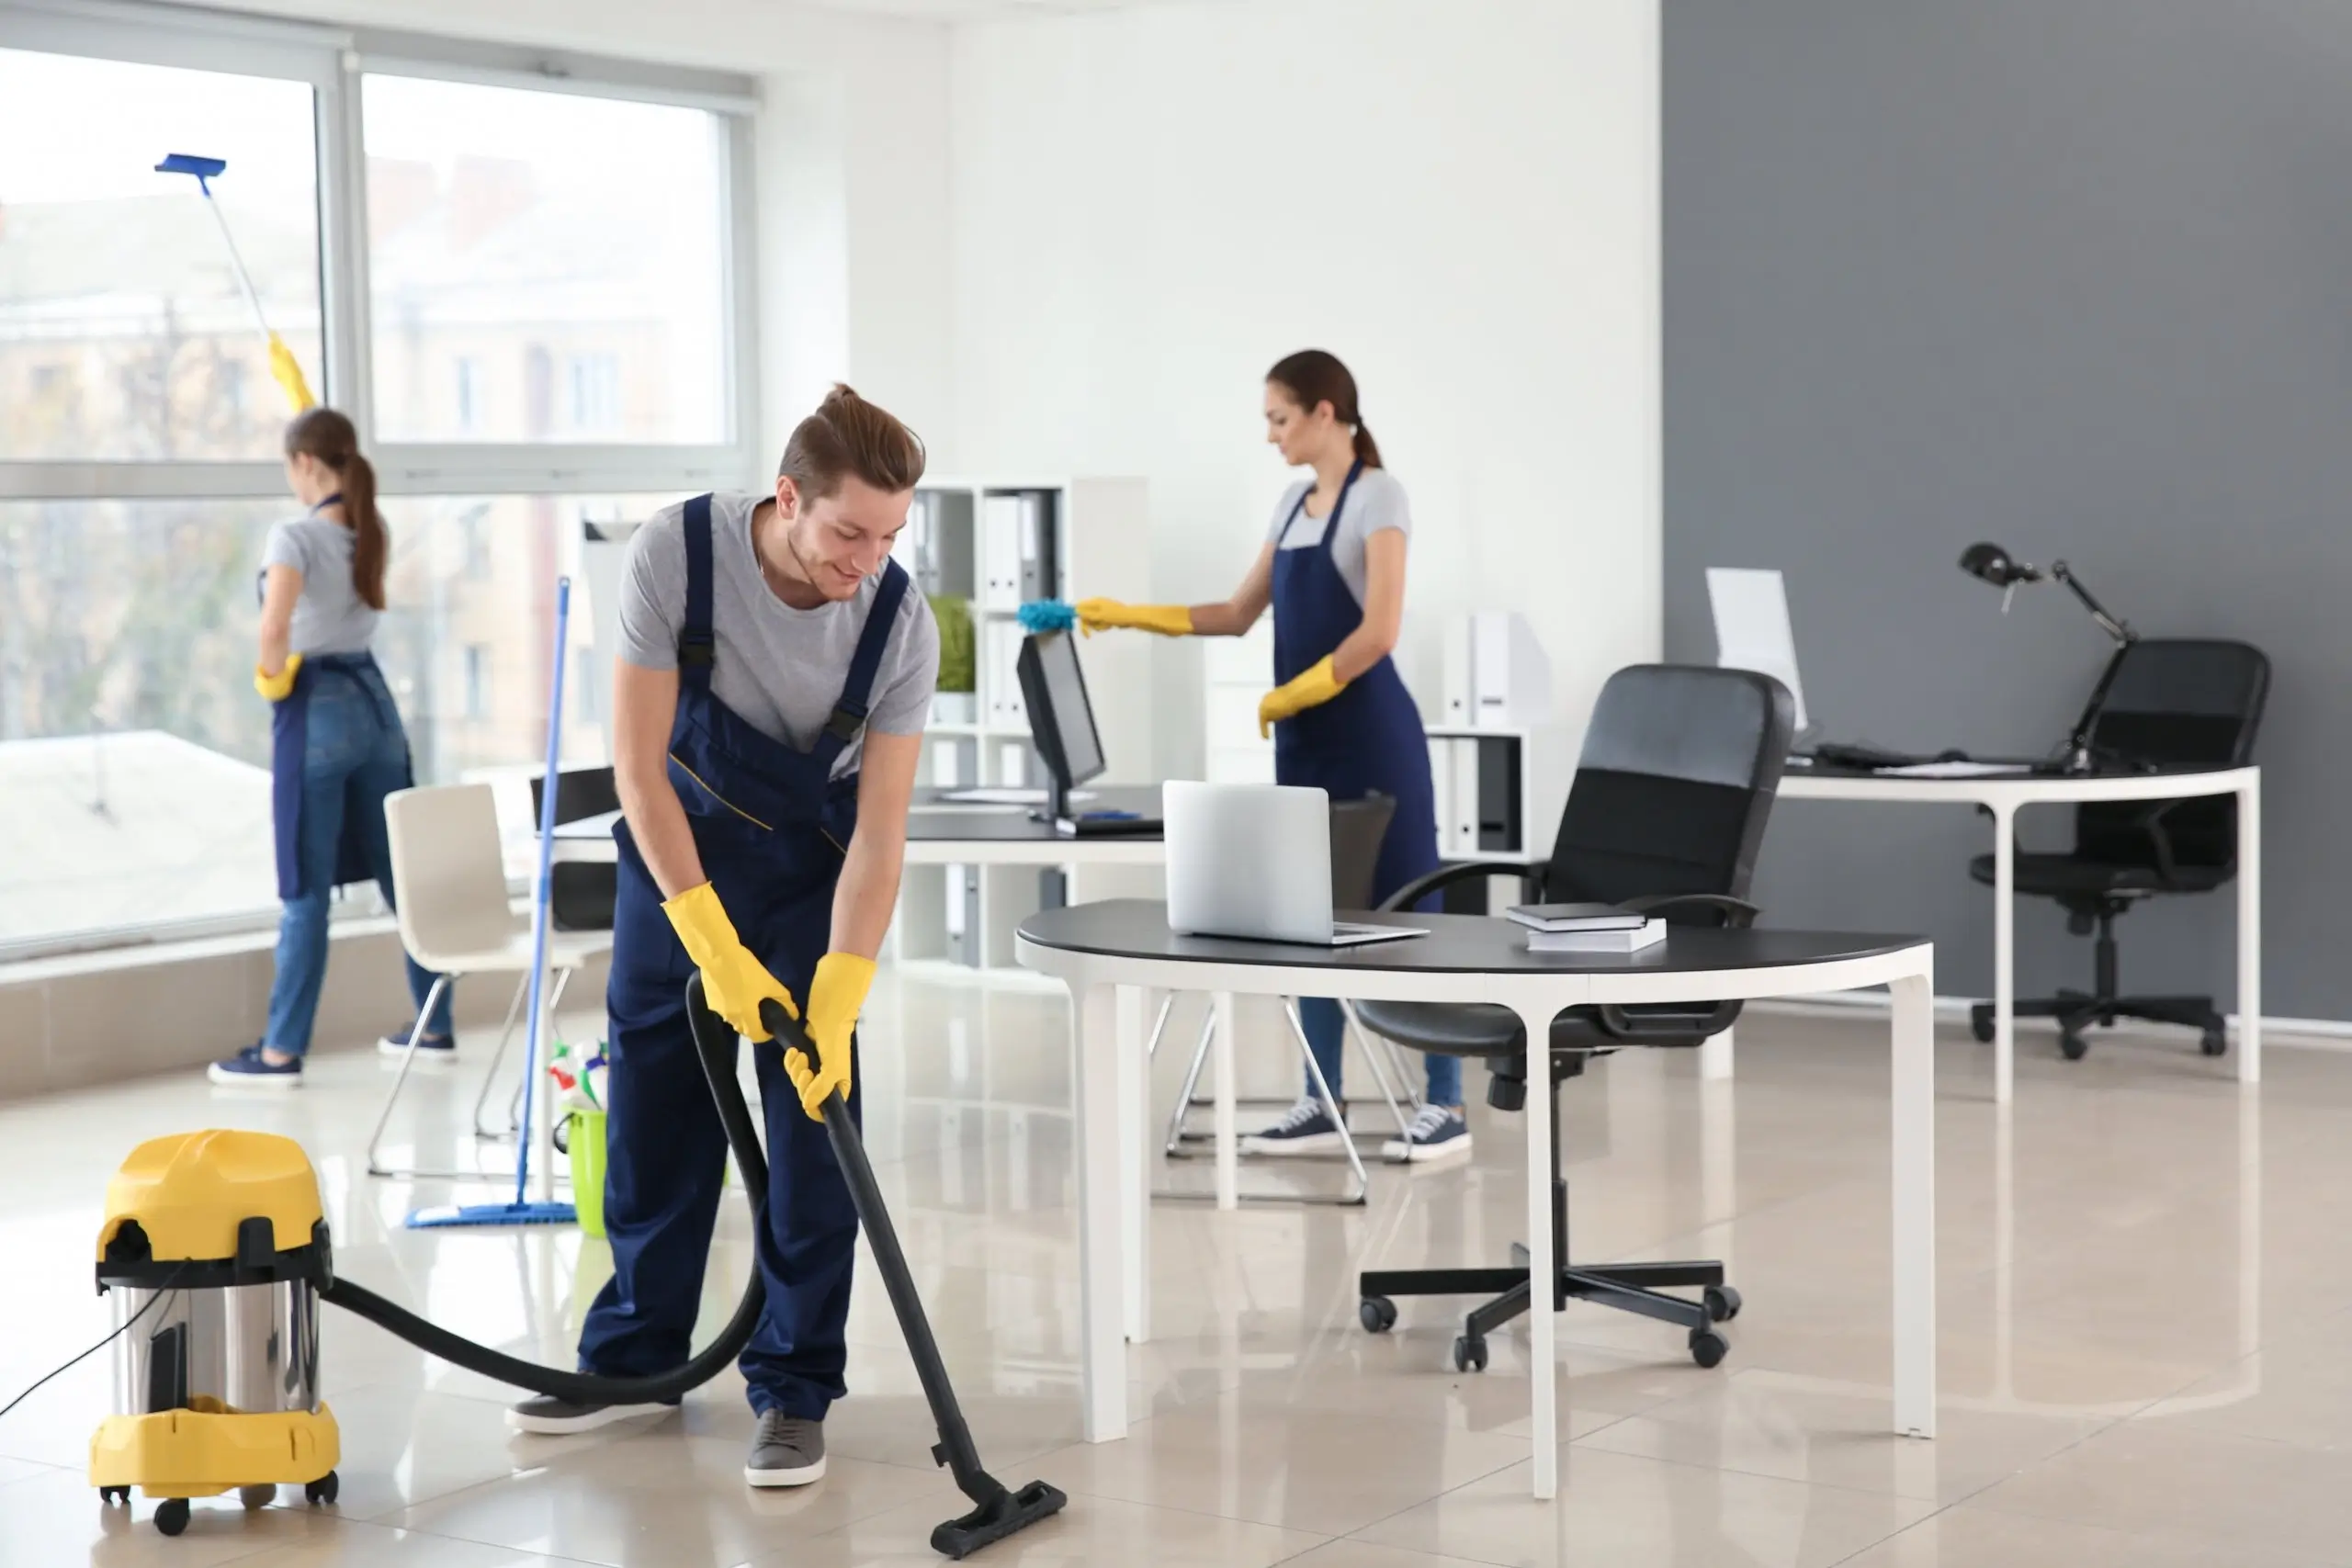 Commercial cleaning and office services across Spain.